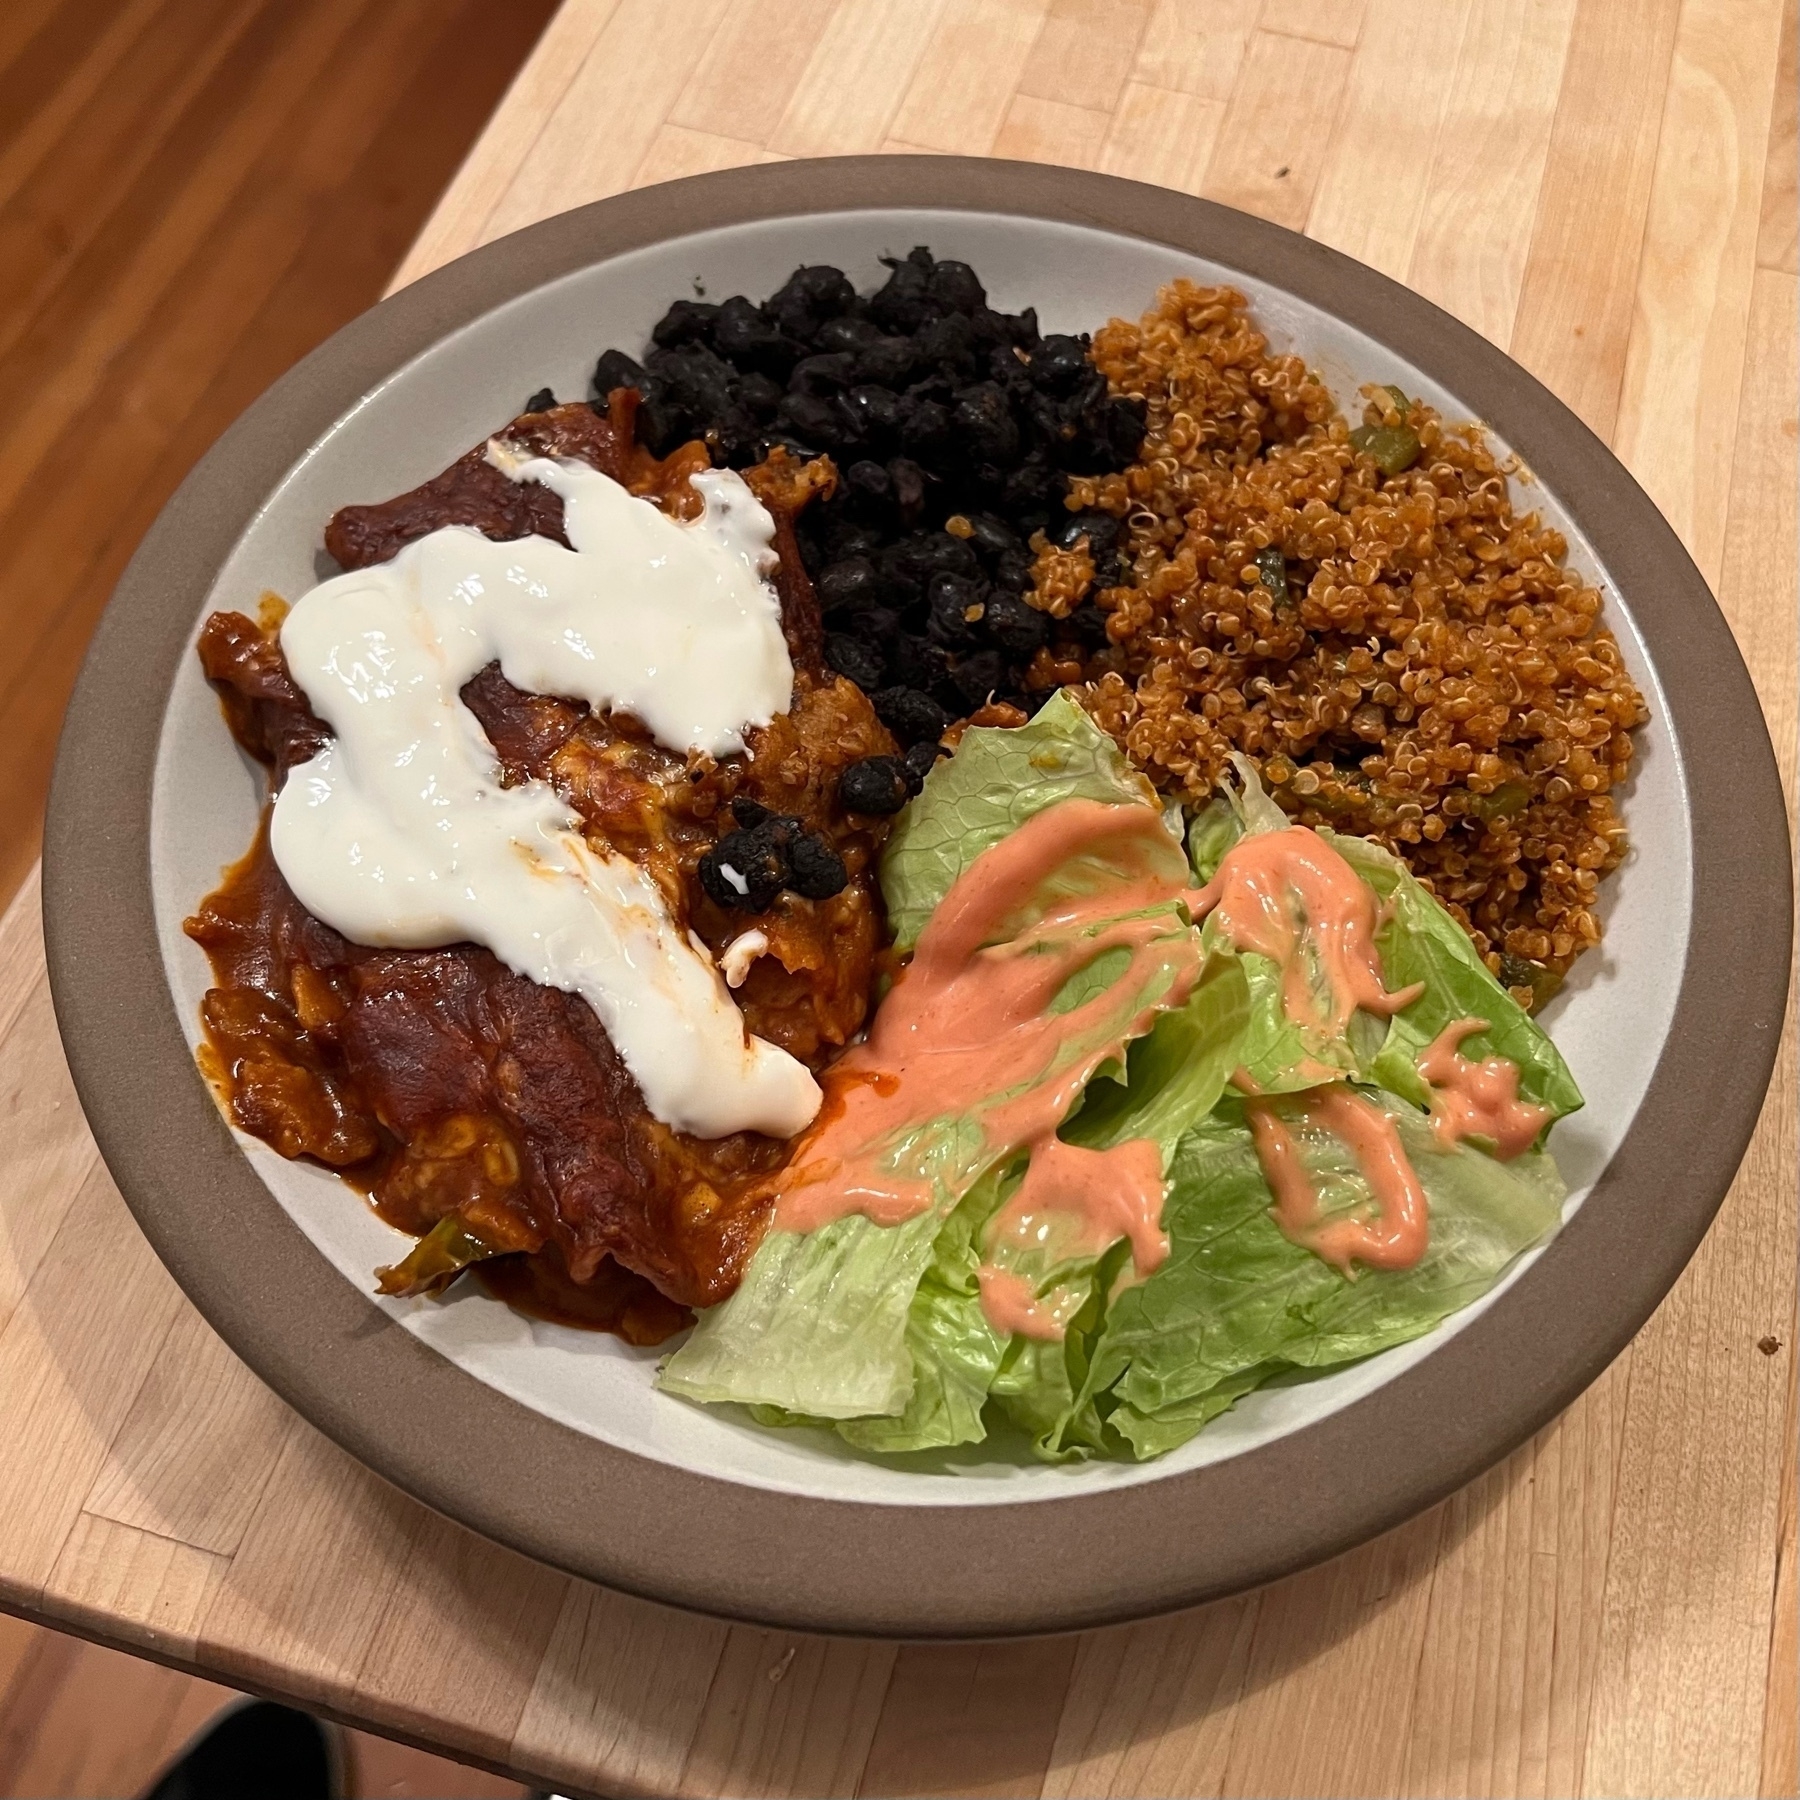 picture of a dinner plate with black beans, enchiladas with sour cream, quinoa seasoned like mexican rice, and a plain salad with thousand island dressing